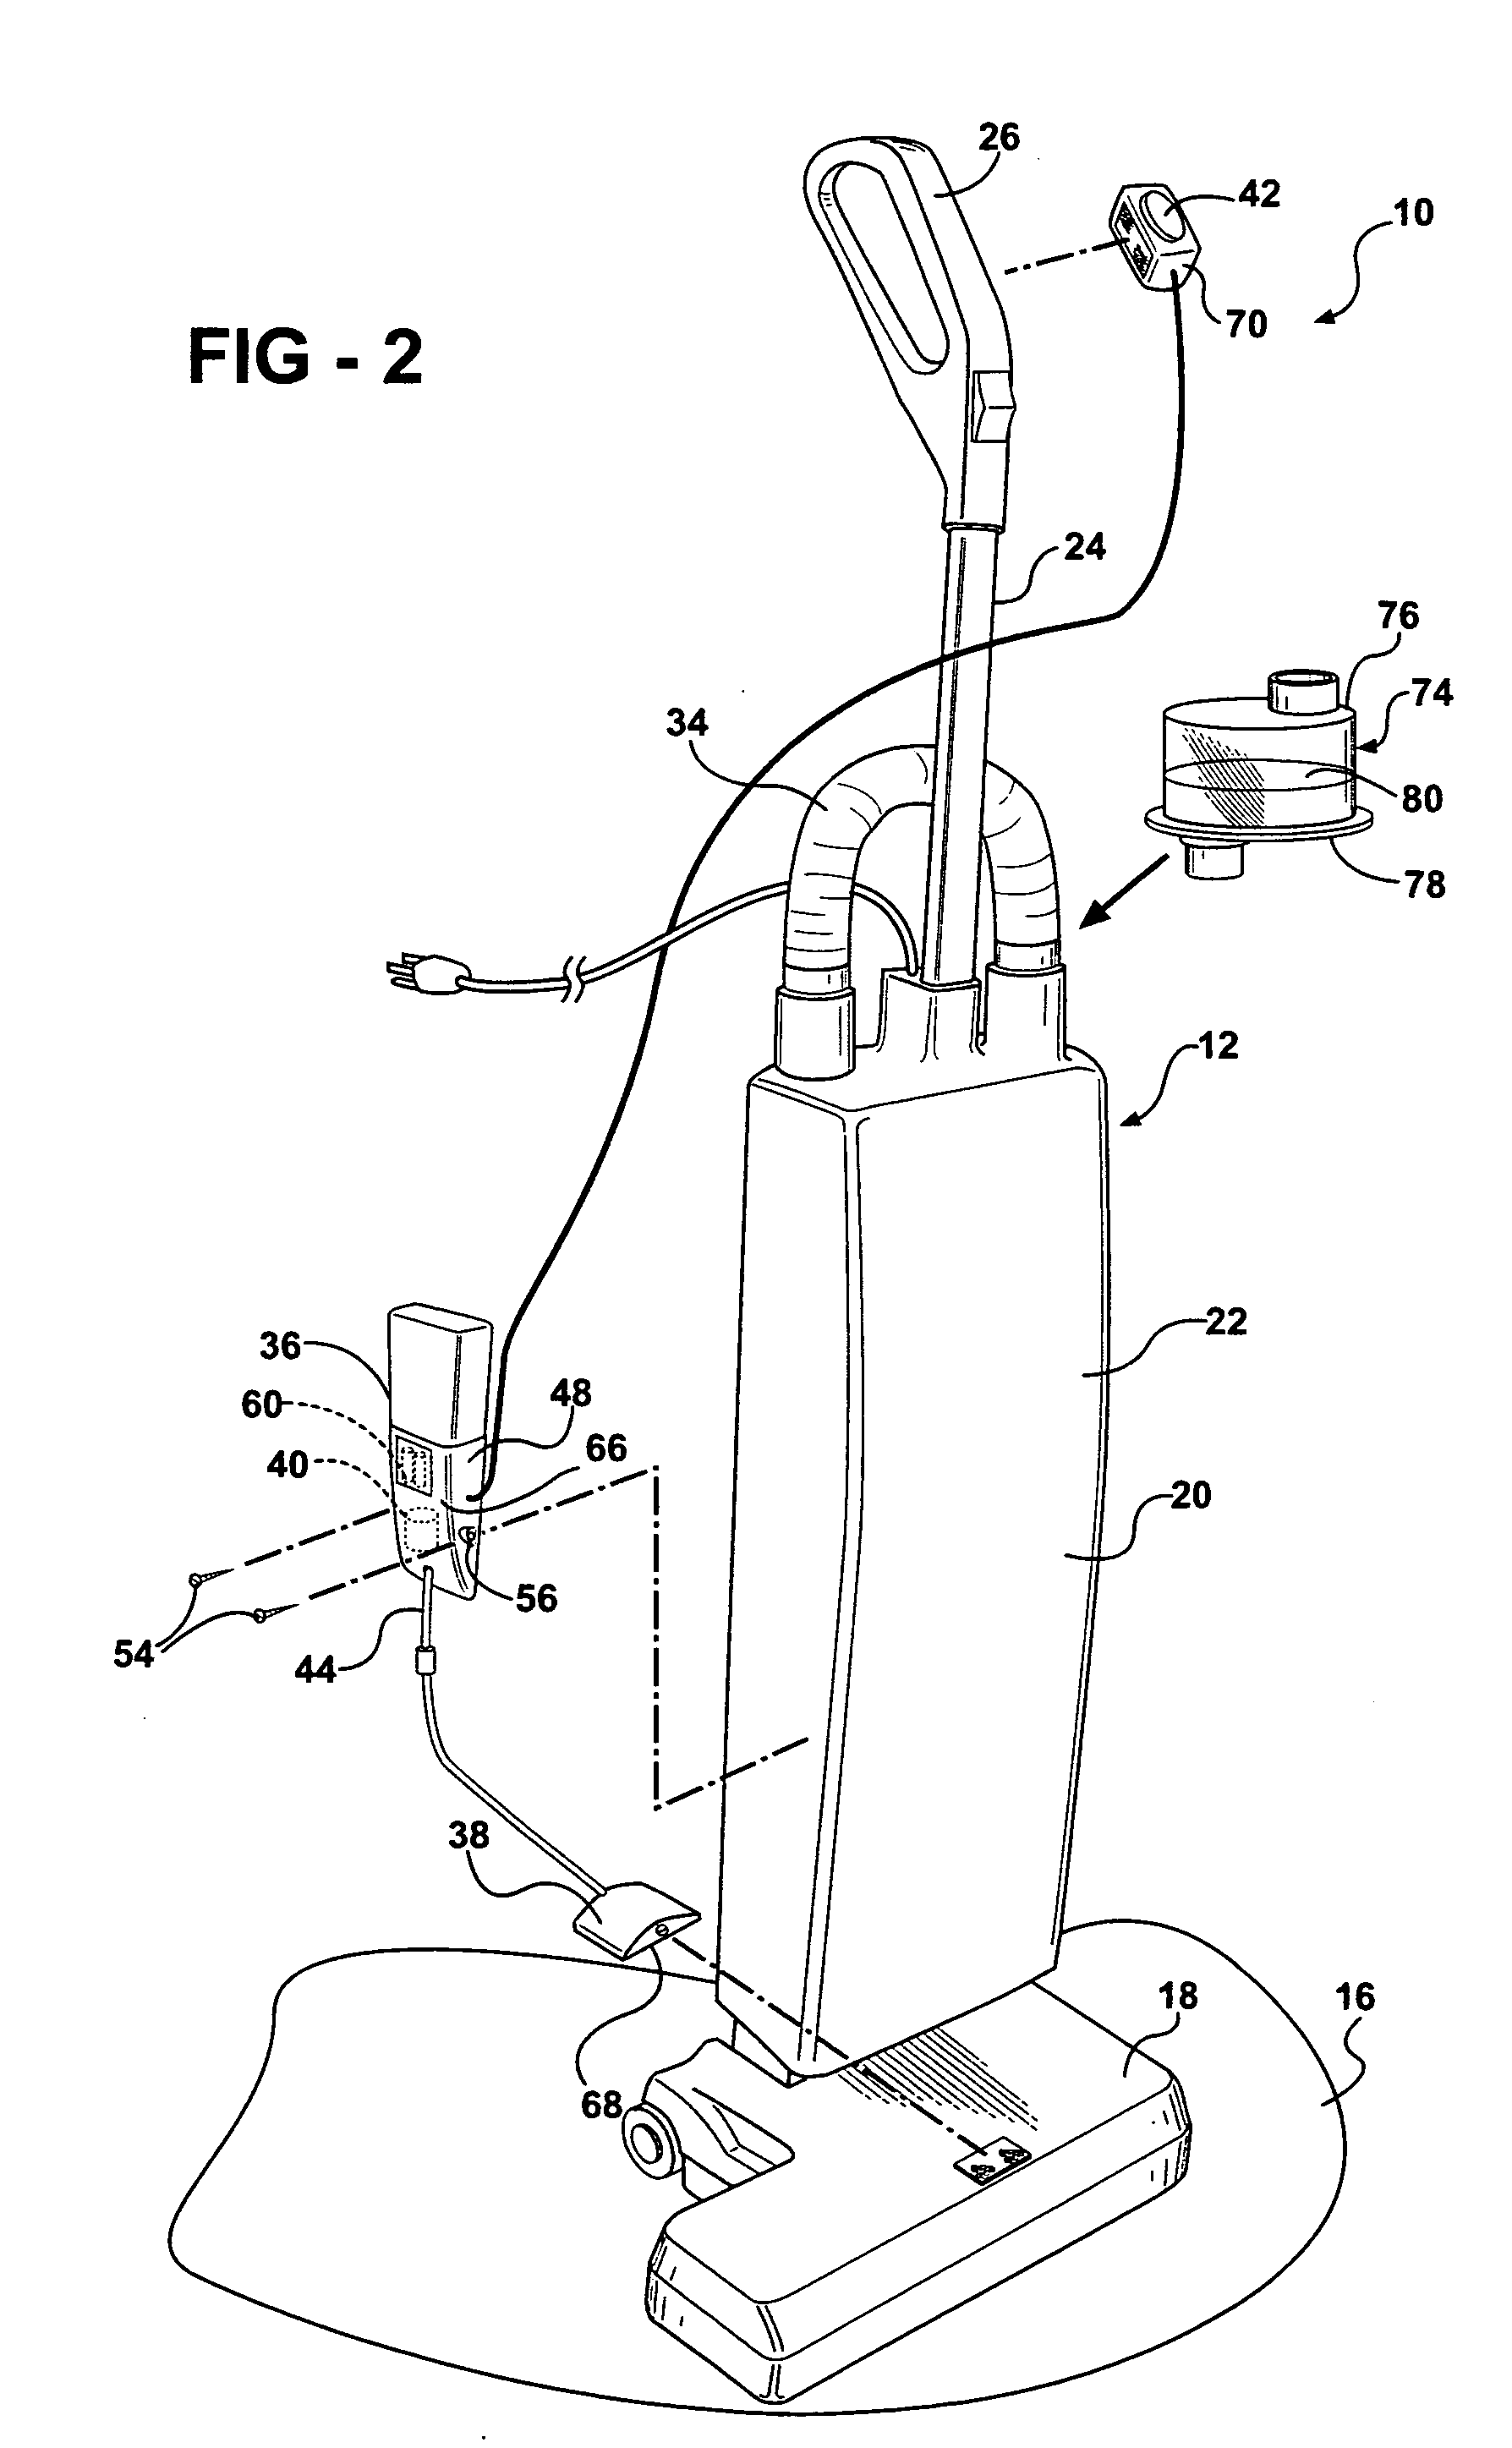 Carpet cleaning apparatus and method of construction